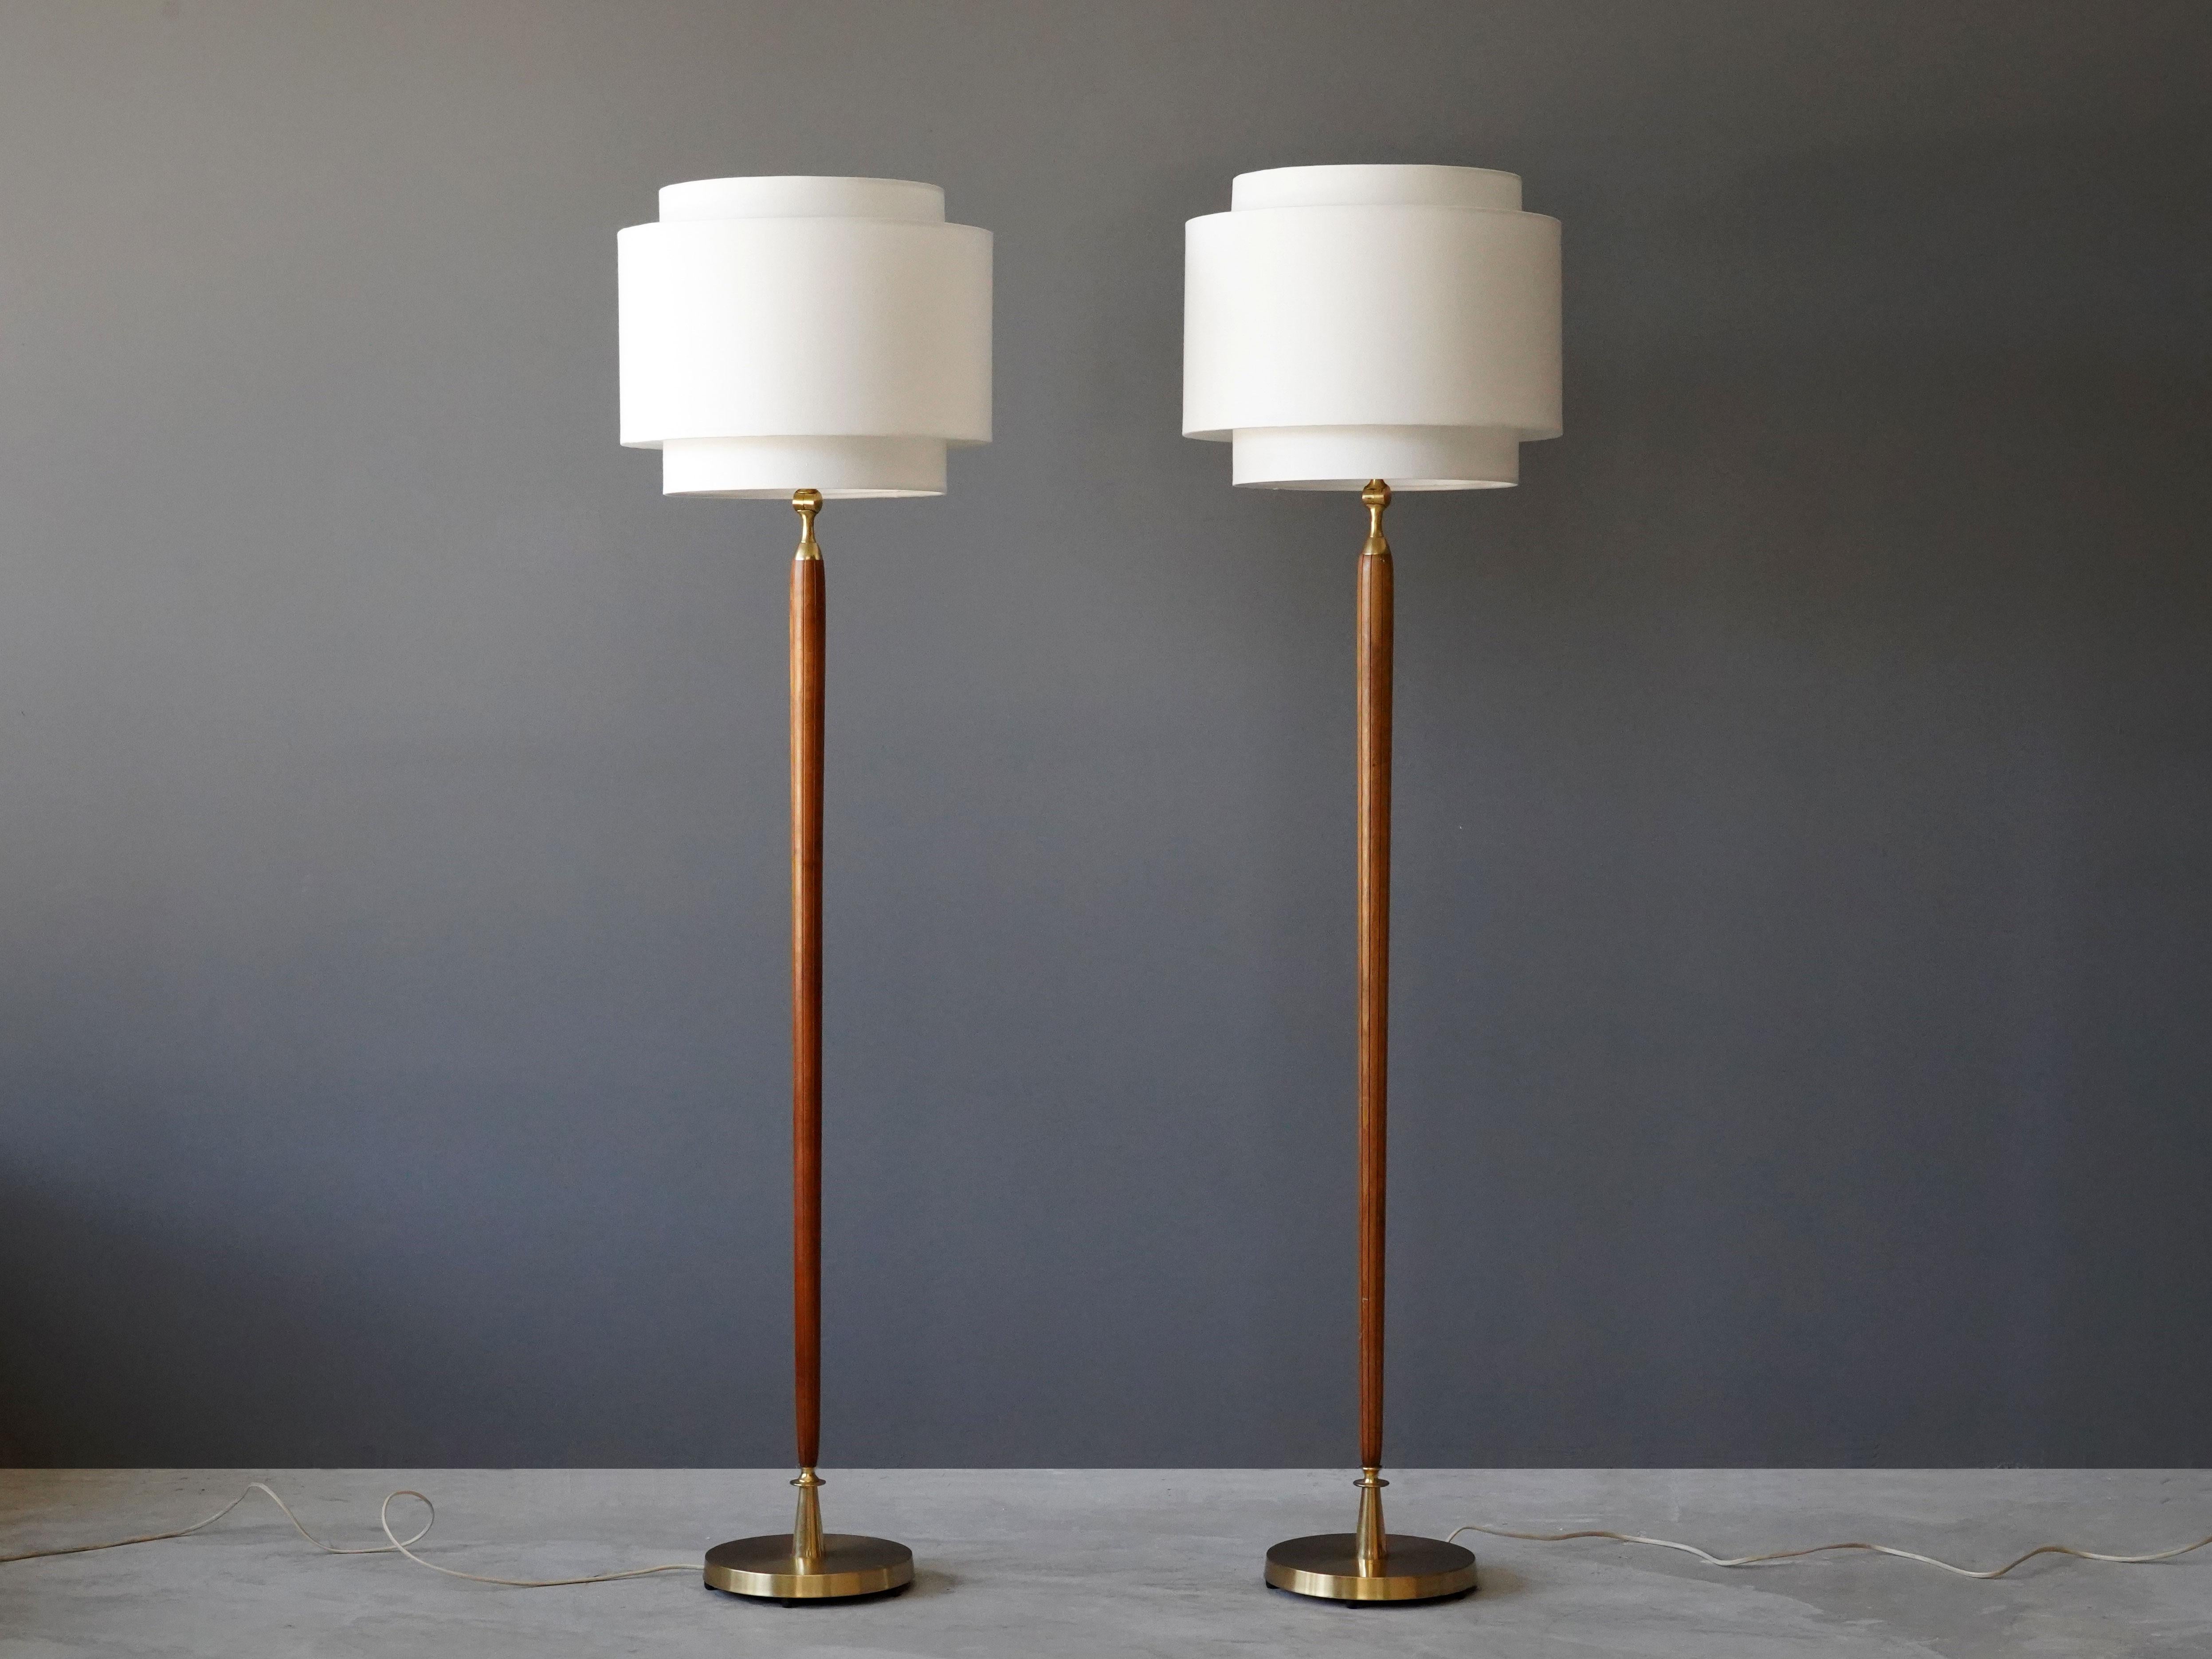 A pair of floor lamps. Designed by an unknown Swedish designer. Produced in the 1940s. Features finely carved wooden rods on brass bases. Screens are adjustable and can be tilted. 

Other designers working in similar style include Paavo Tynell,